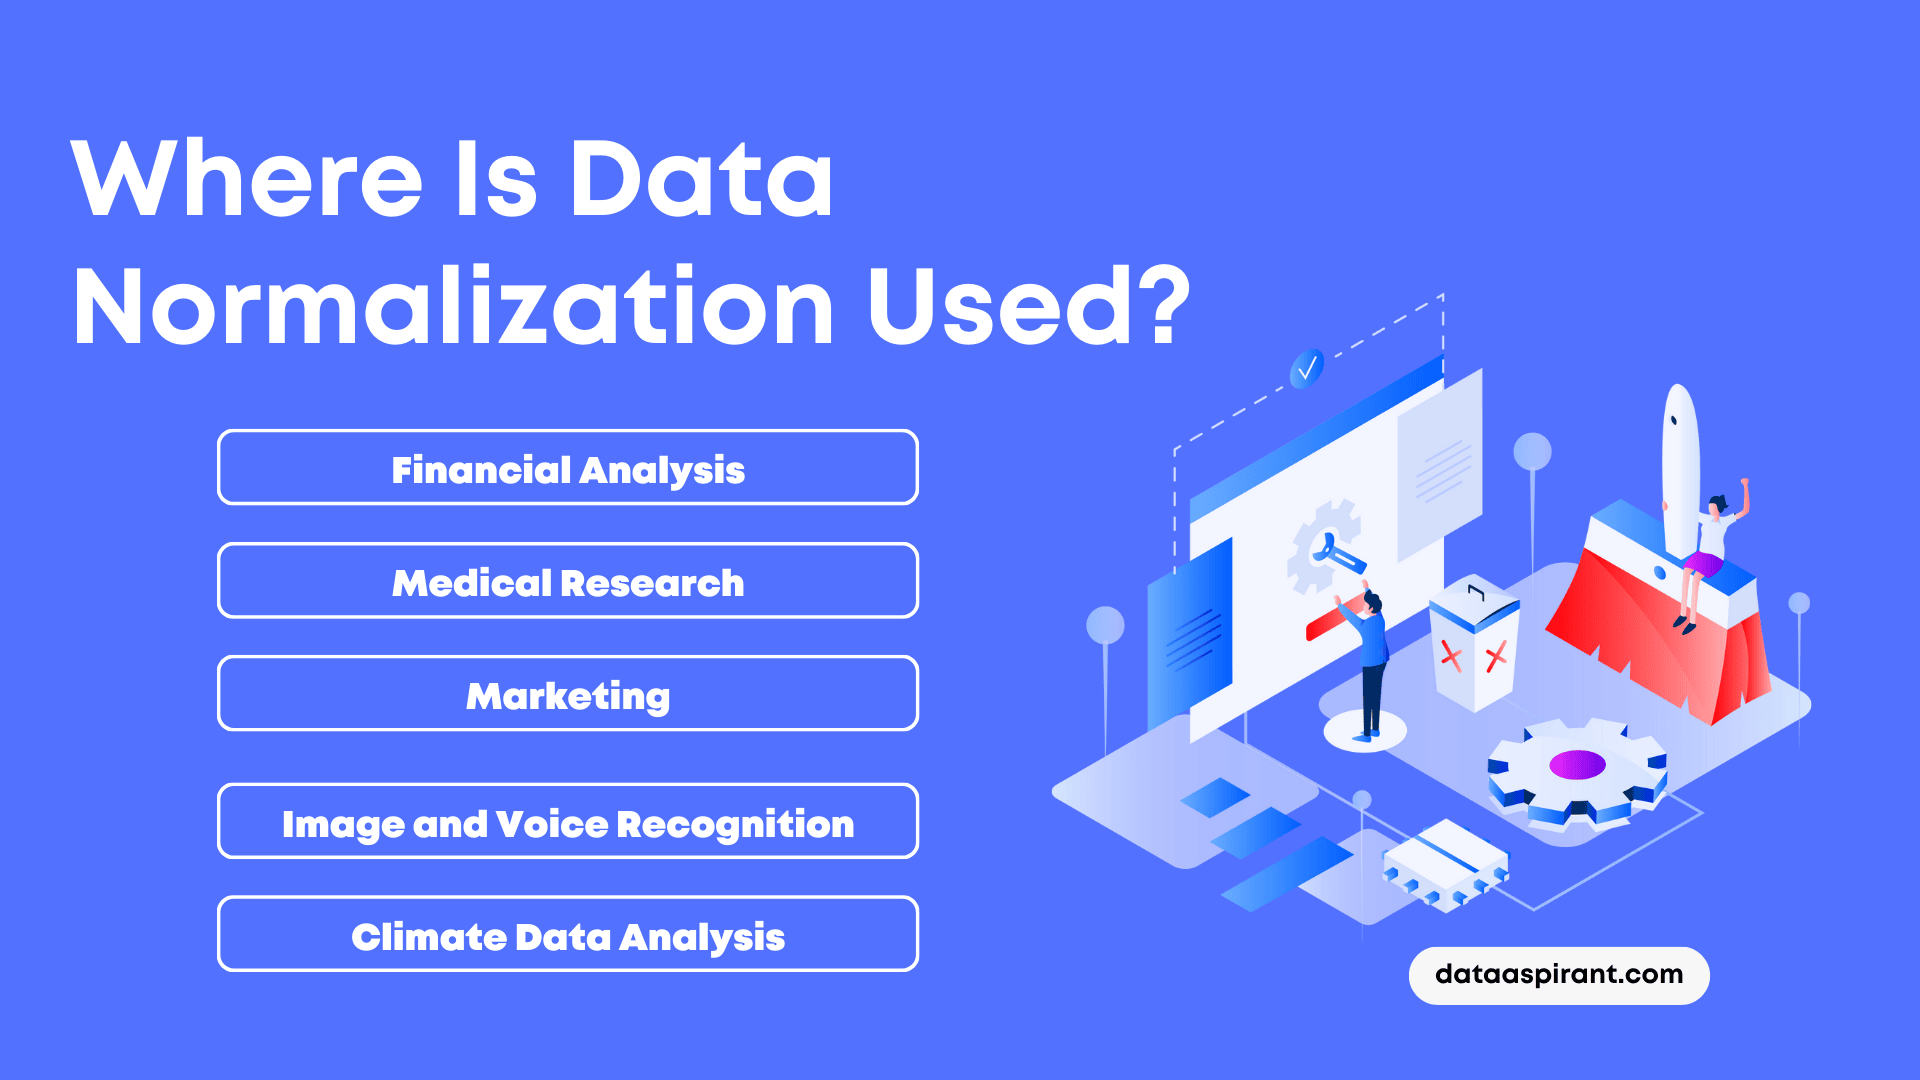 Where Is Data Normalization Used